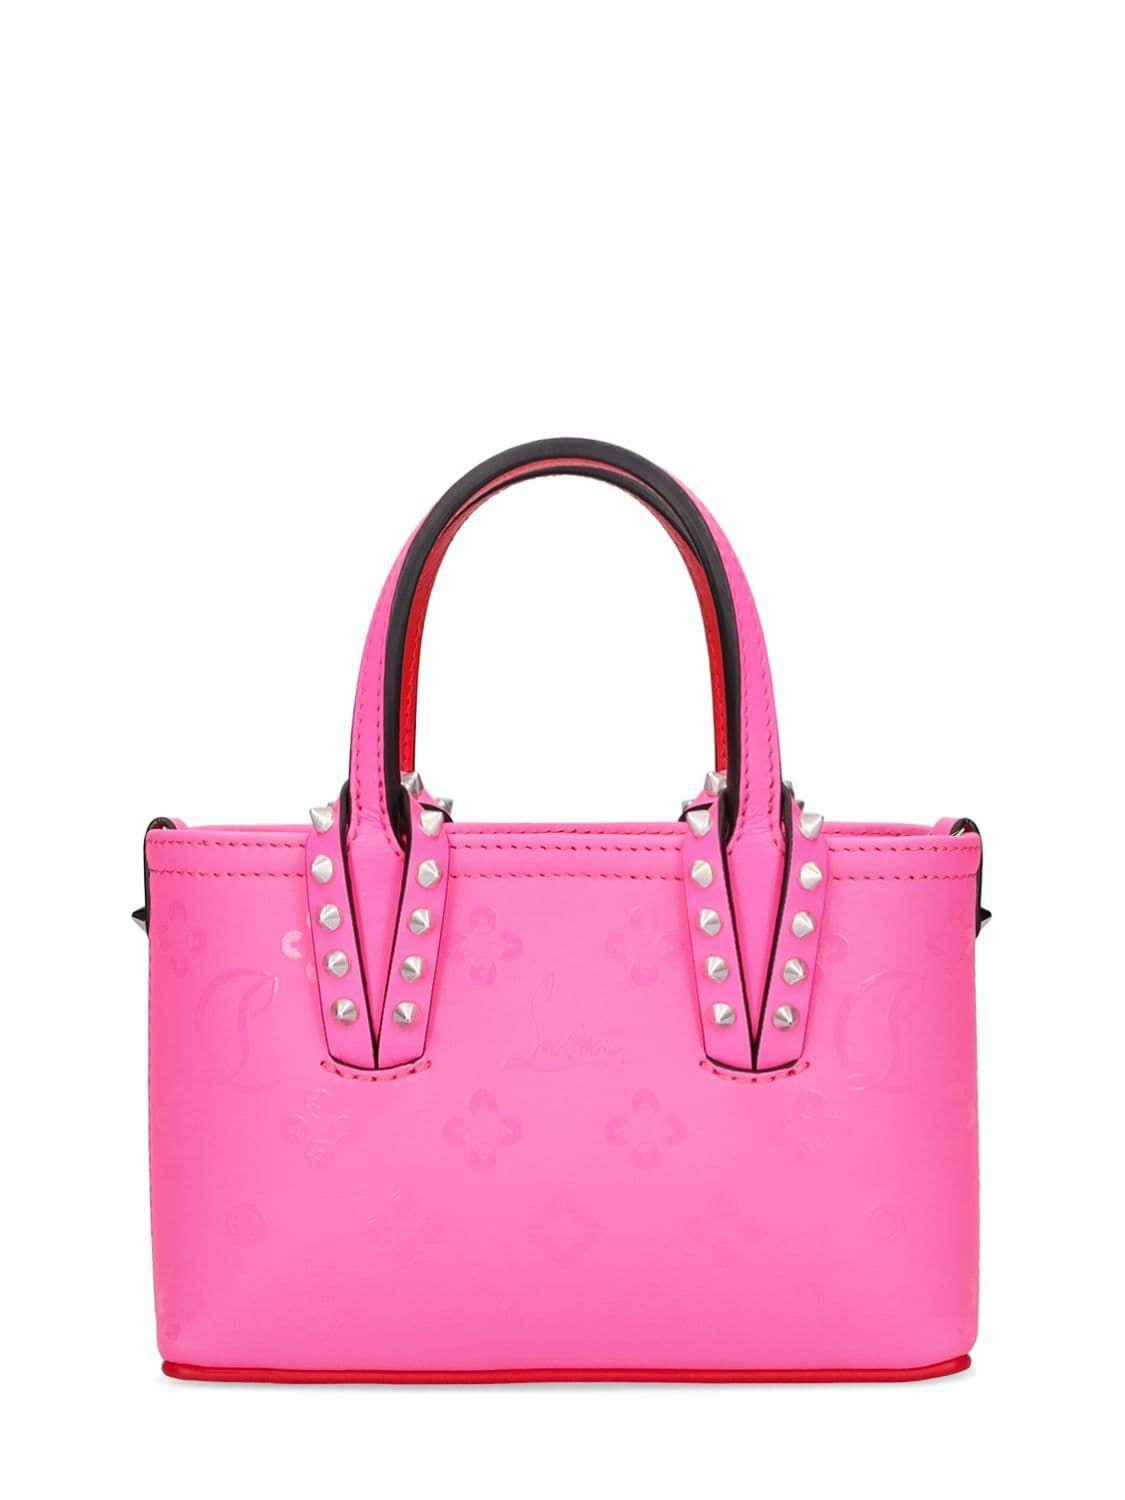 Christian Louboutin Nano Cabata Leather Top Handle Bag in Pink | Lyst